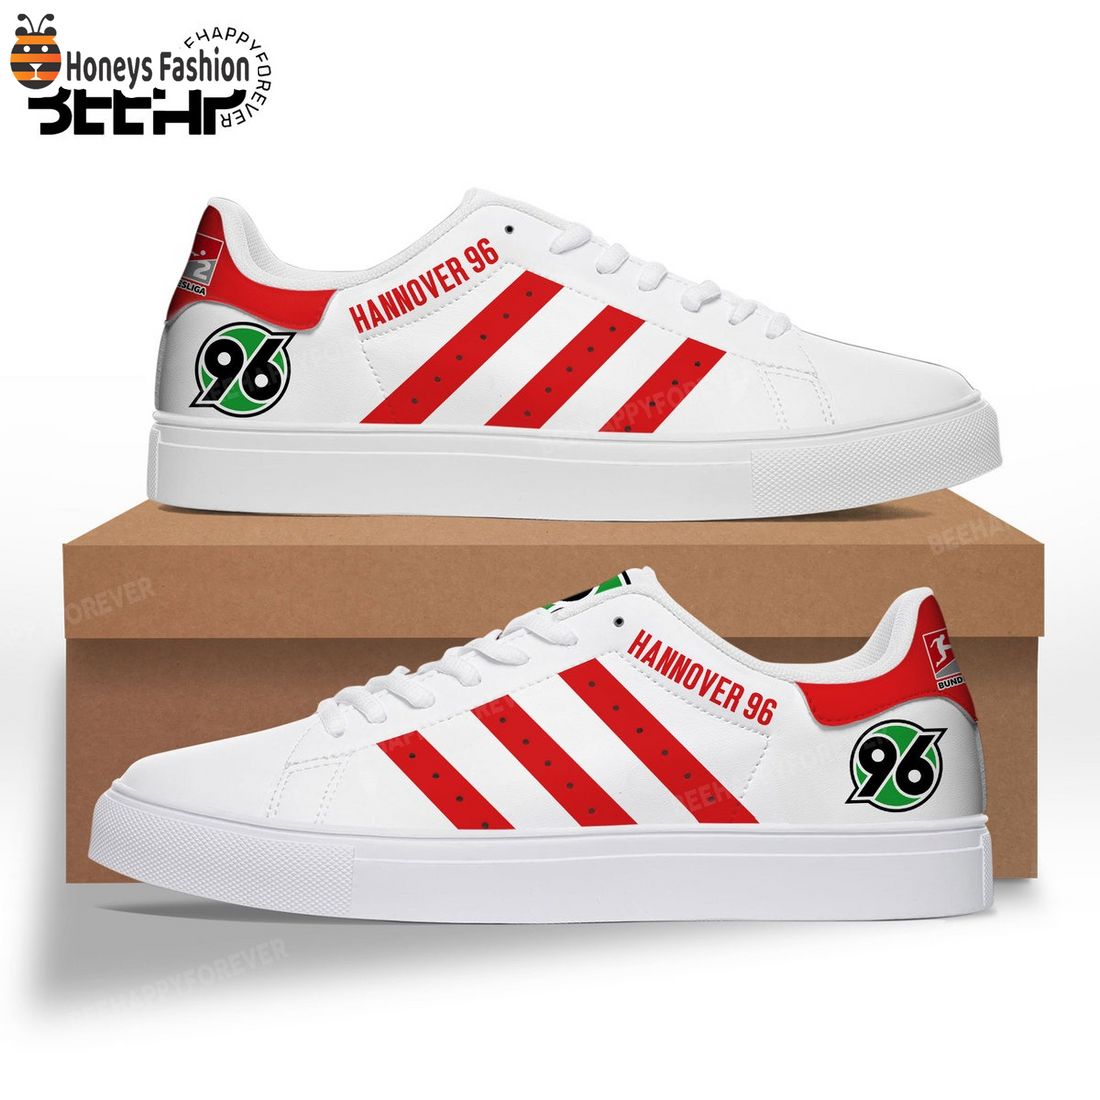 Hannover 96 Adidas Stan Smith Trainers